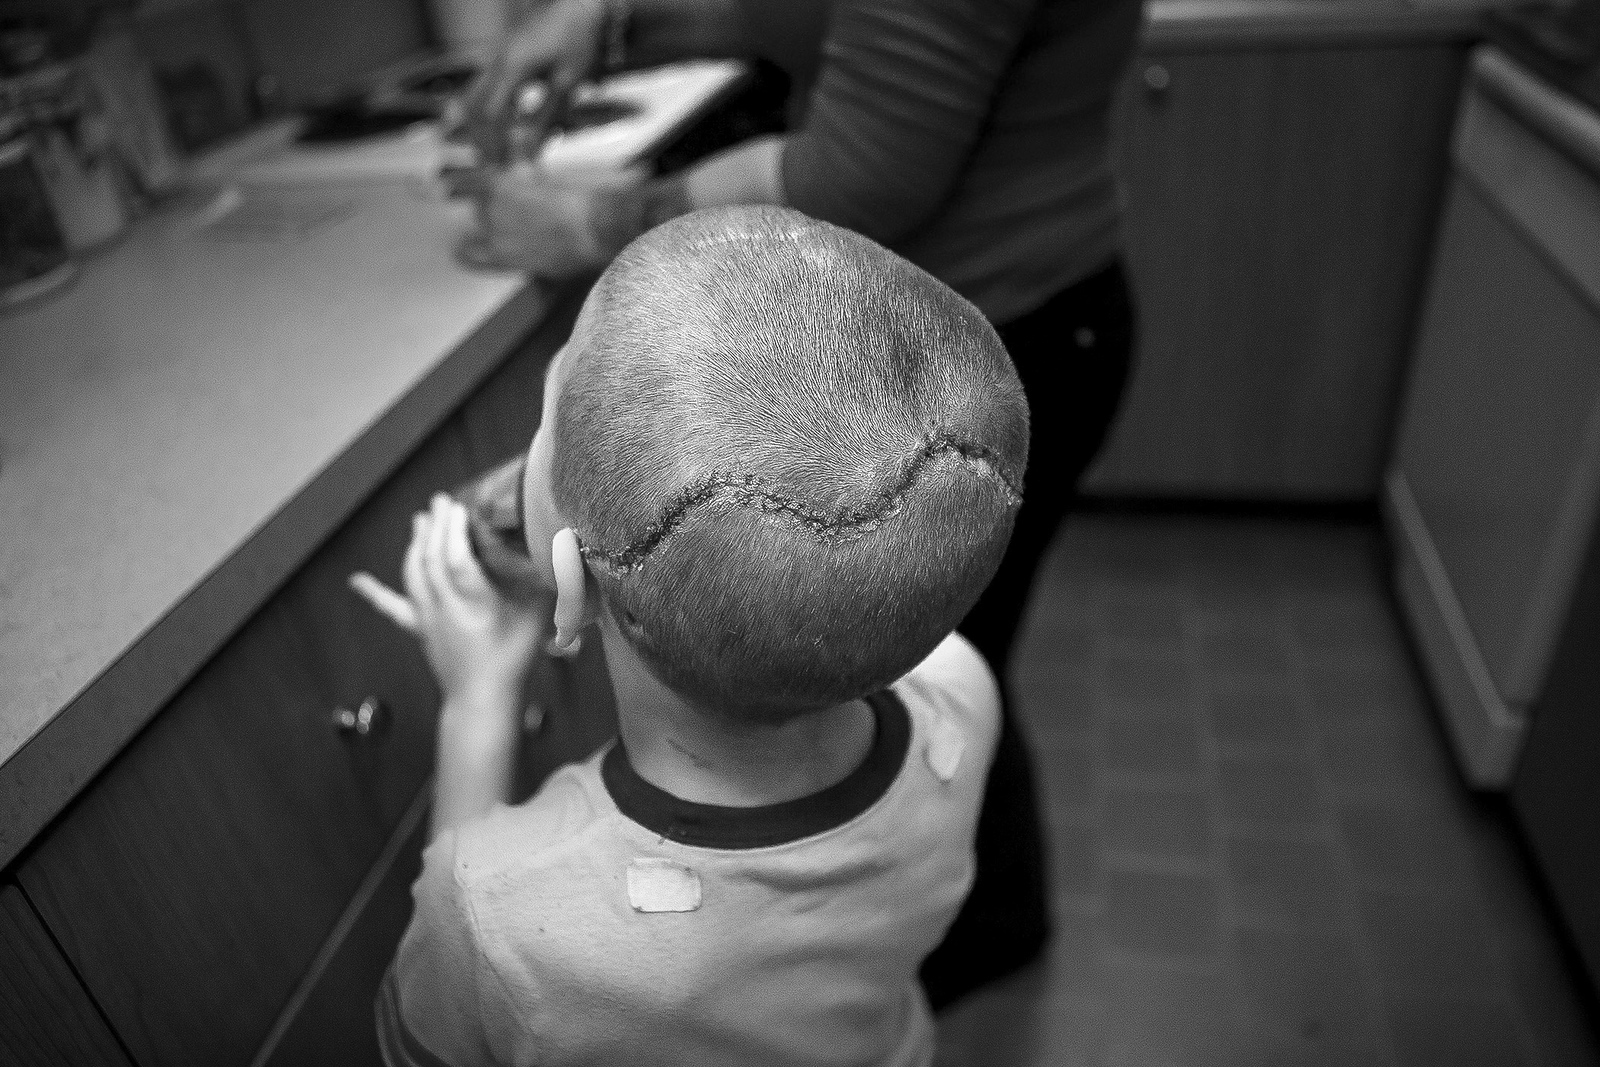  Jacob Gutierrez, 4, swallows medicine from his mother after undergoing a series of major skull surgeries. When Jacob was a baby, he had to wear a helmet, but his family hopes that this will be the last surgery he will need to correct his craniosynos